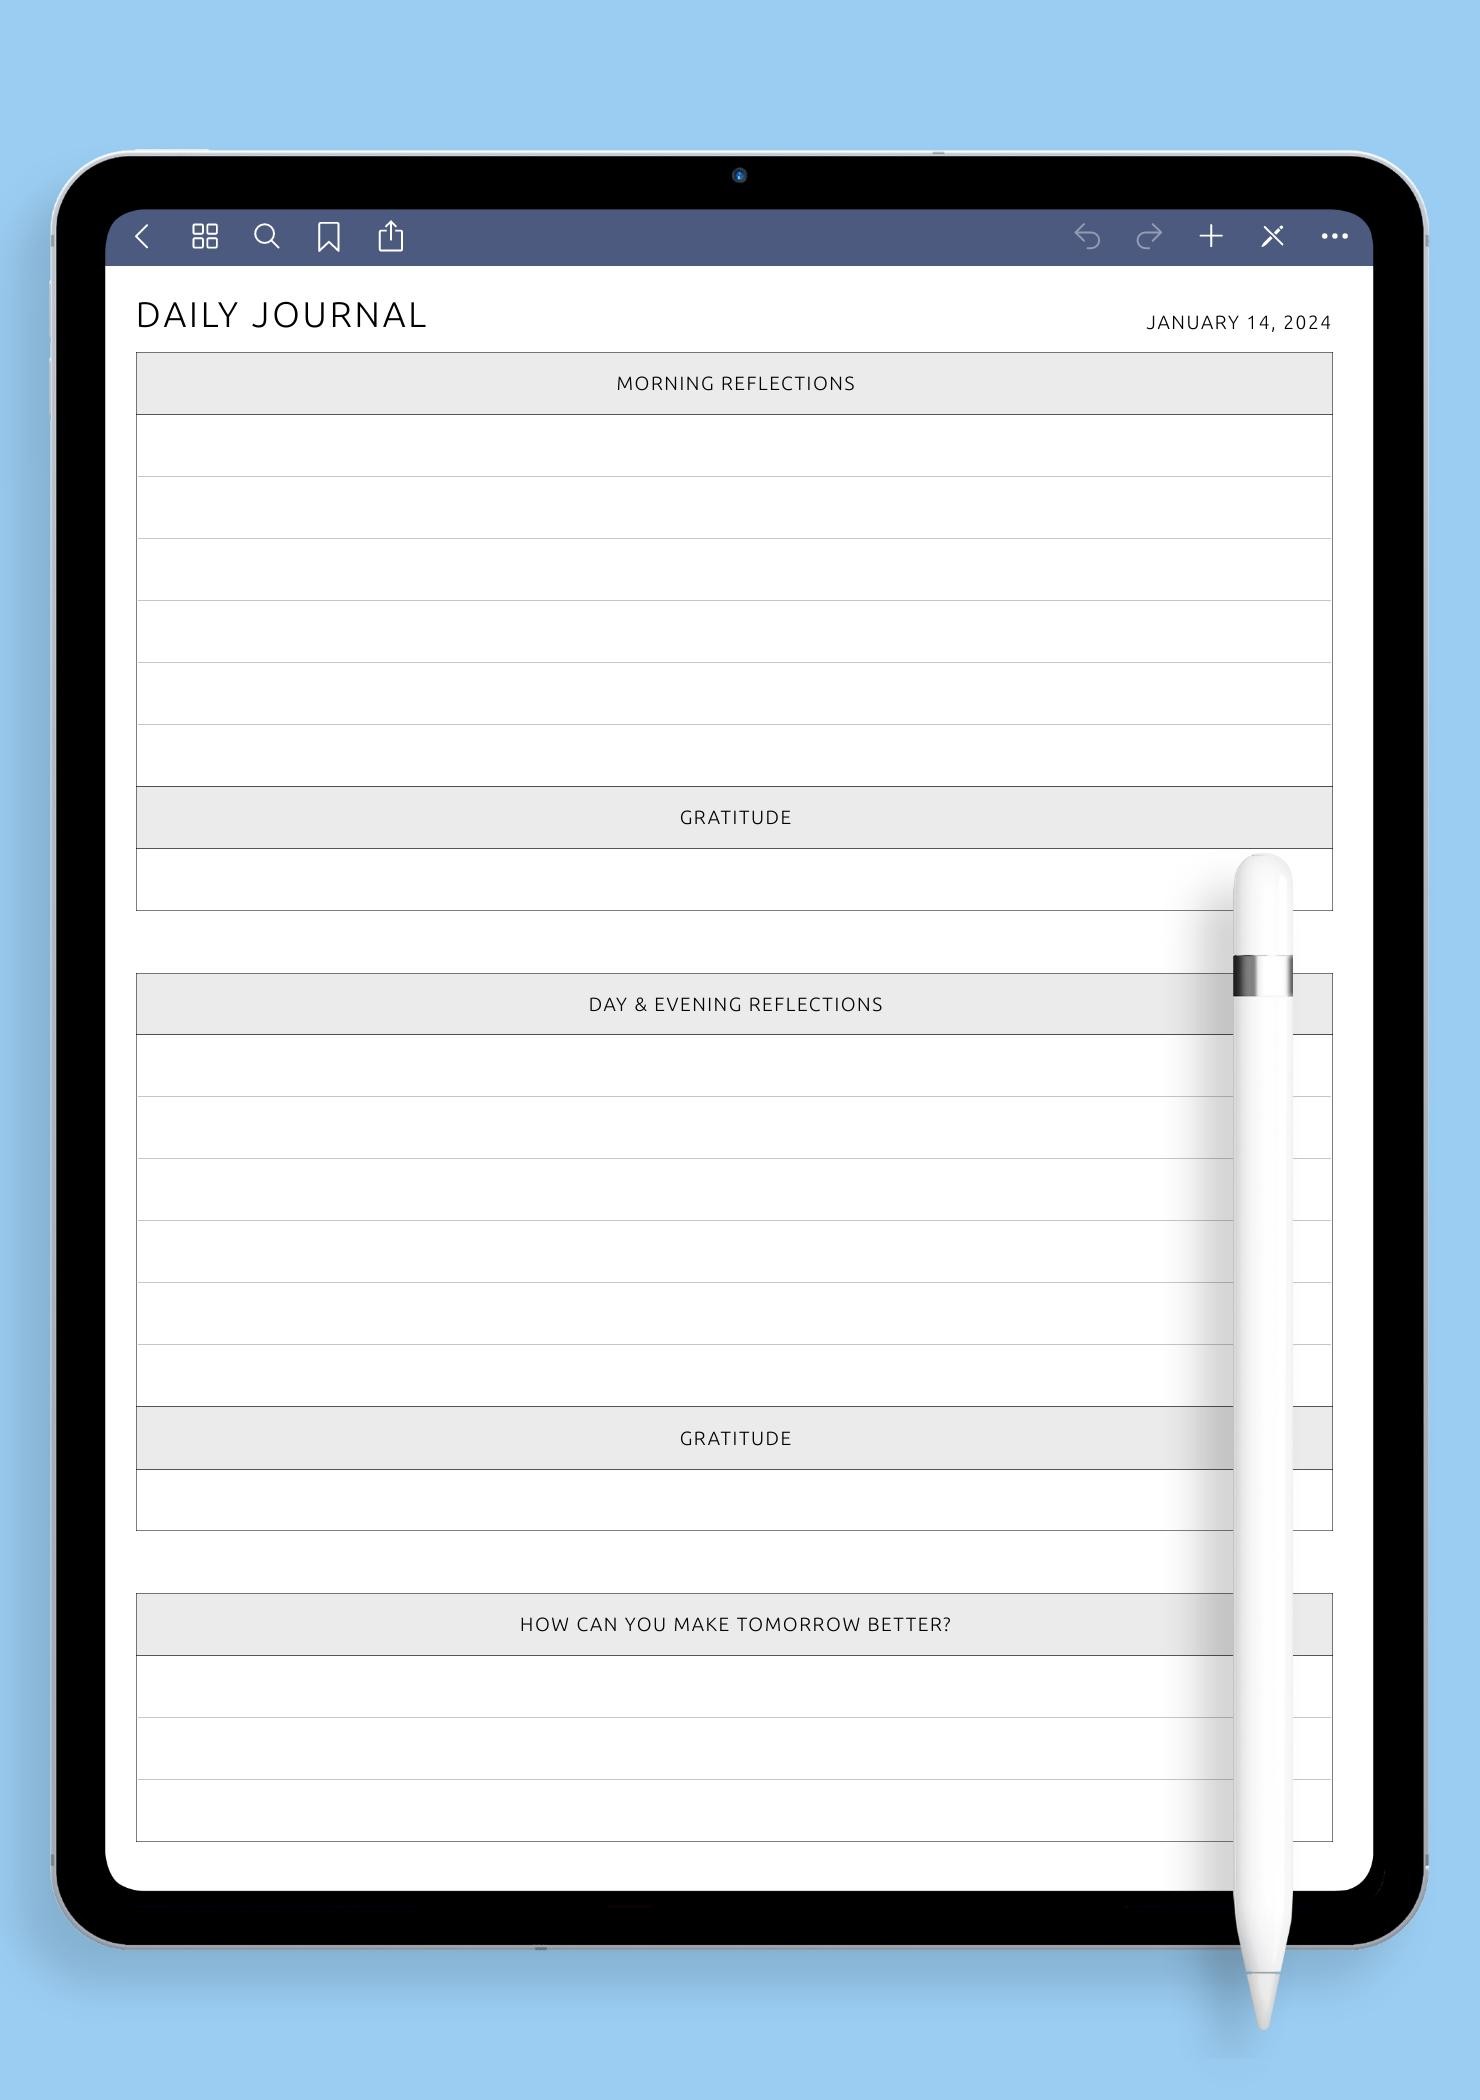 Time-Tested Daily Journal Template (Download) - Journaling Habit